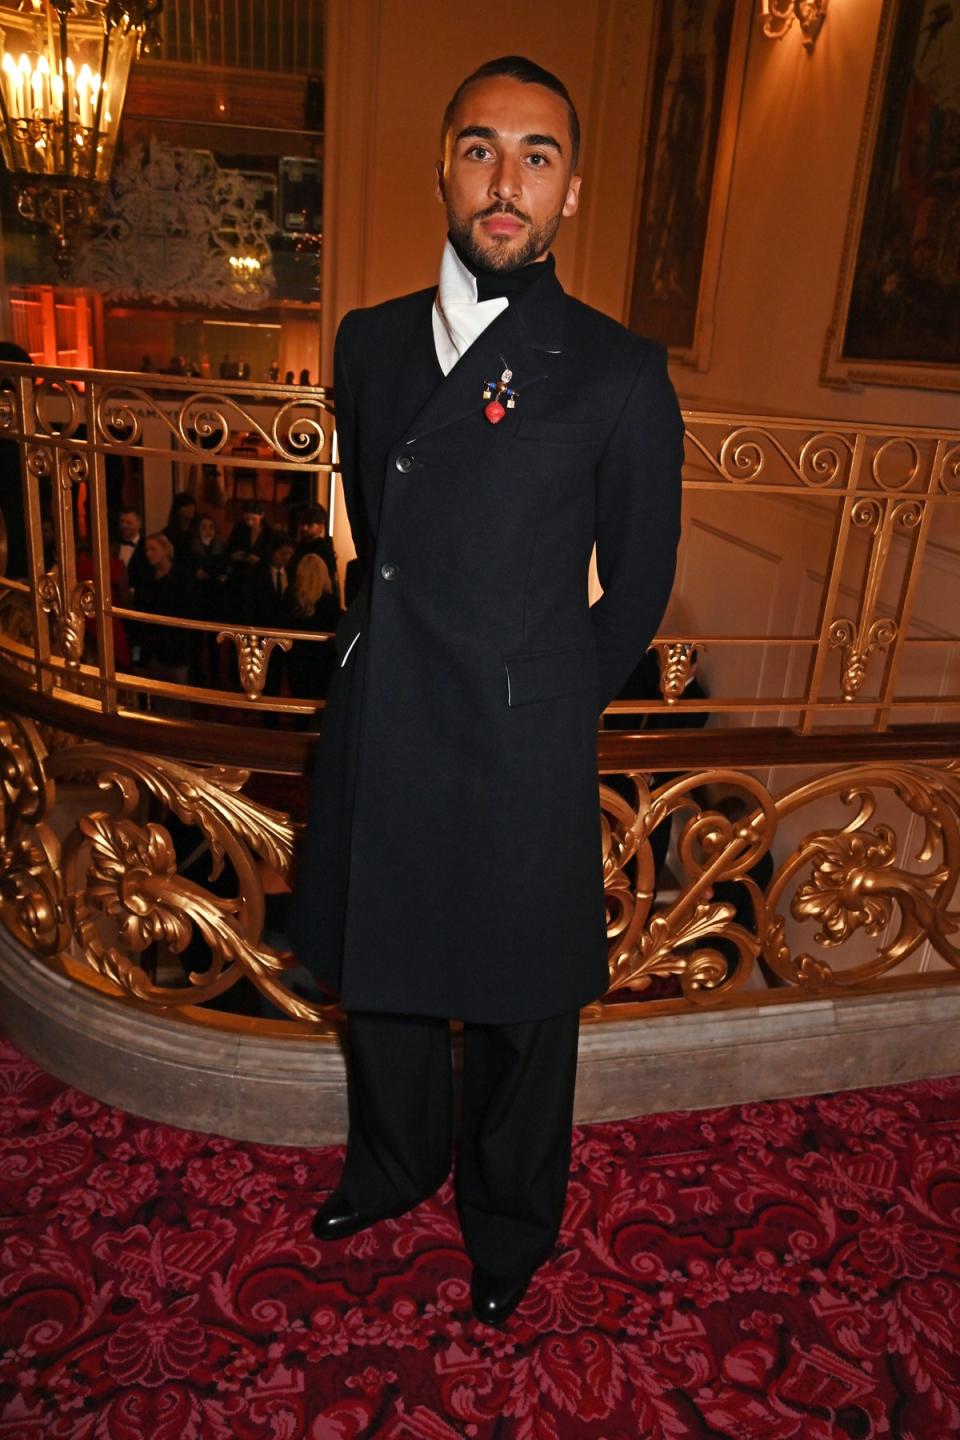 Sophisticated: Dominic Calvert-Lewin attends the GQ Men of the Year Awards at The Royal Opera House in Wales Bonner, styled by Georgia Medley, November 15, 2023 (Dave Benett)